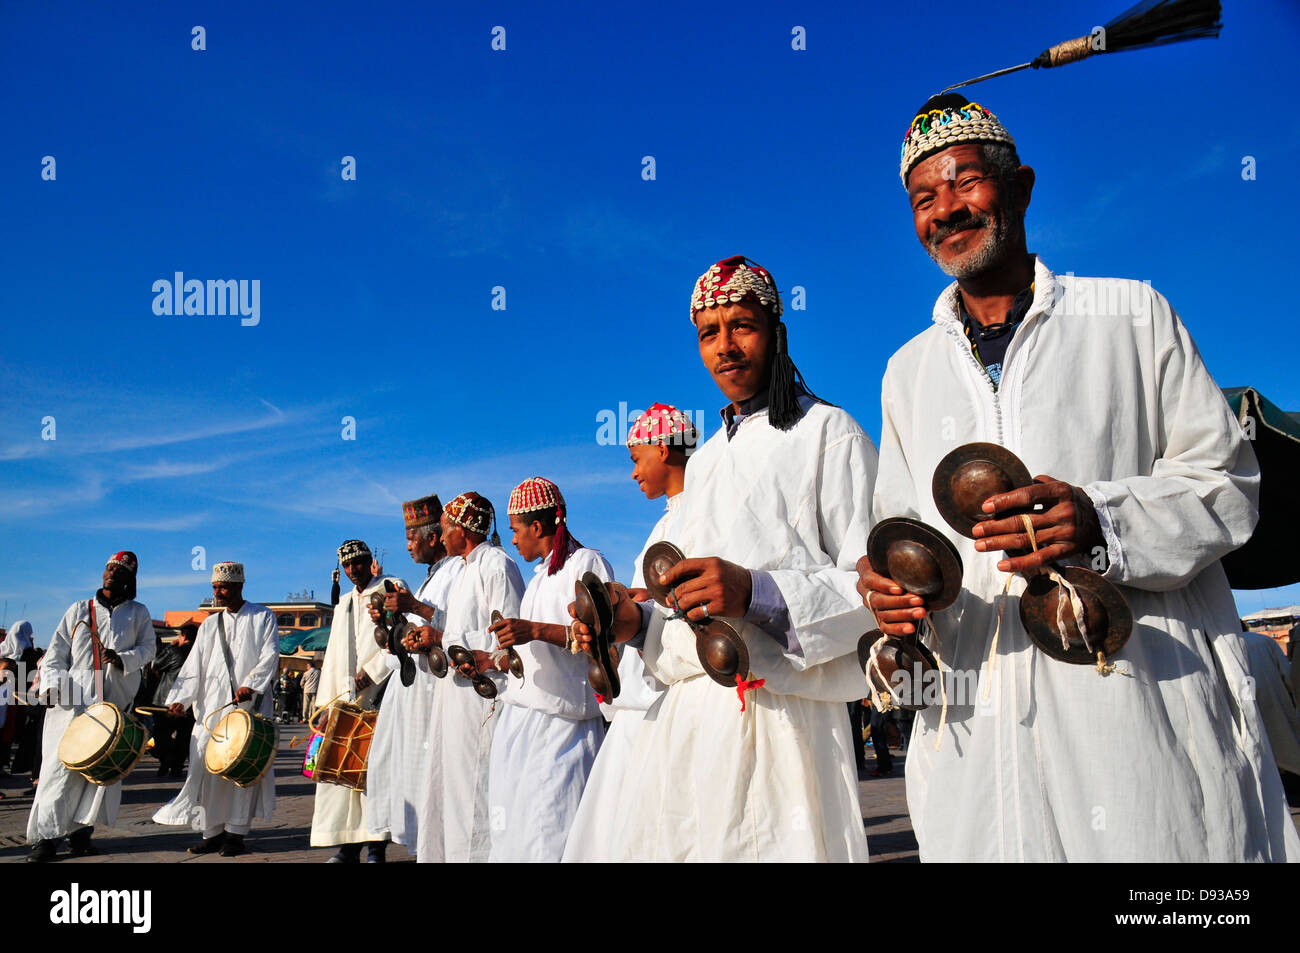 Gnawa dancers on Djemaa El Fna Square, Marrakech, Morocco, North Africa. Stock Photo